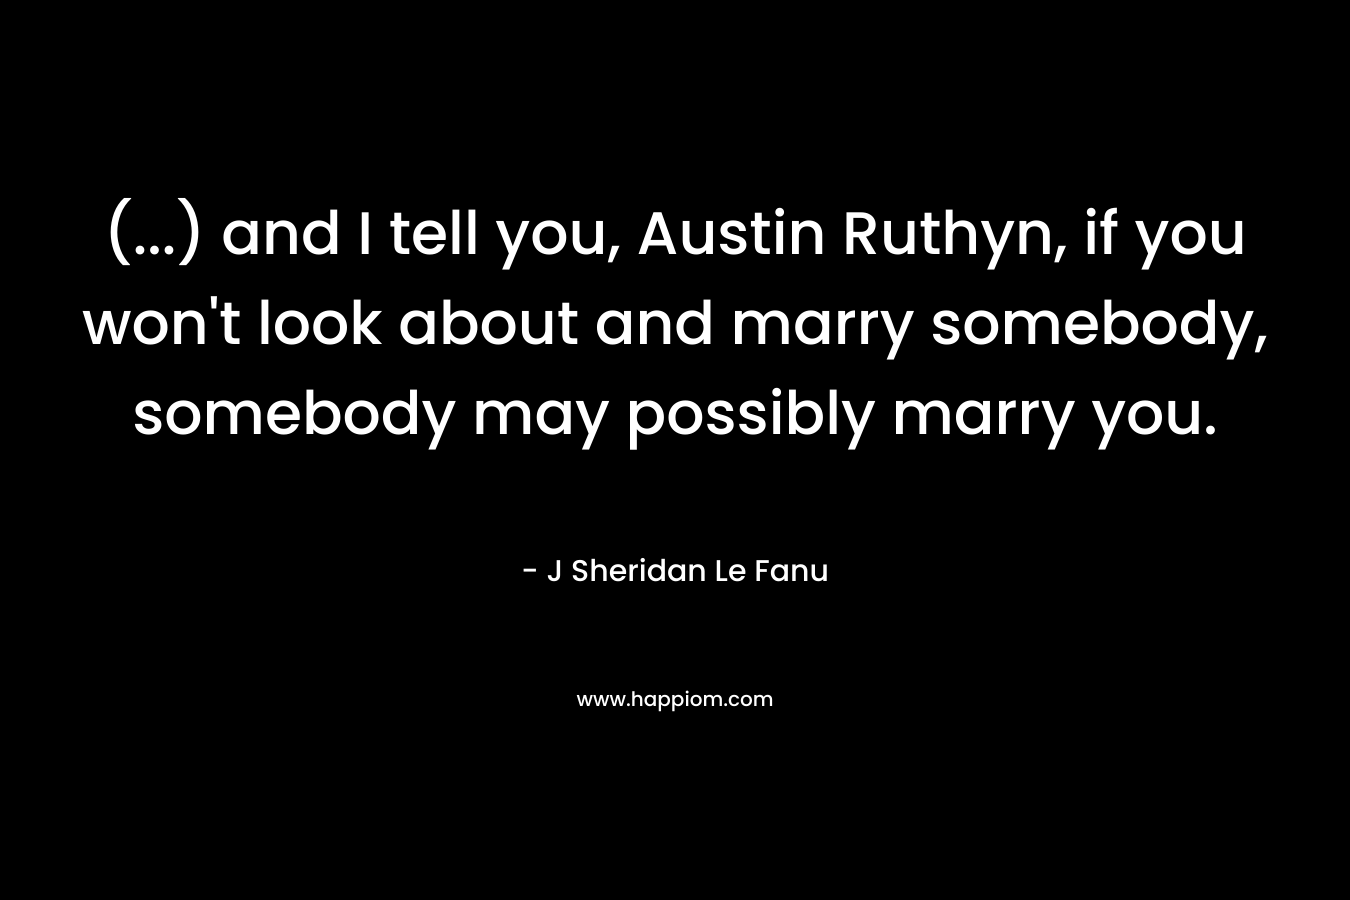 (...) and I tell you, Austin Ruthyn, if you won't look about and marry somebody, somebody may possibly marry you.